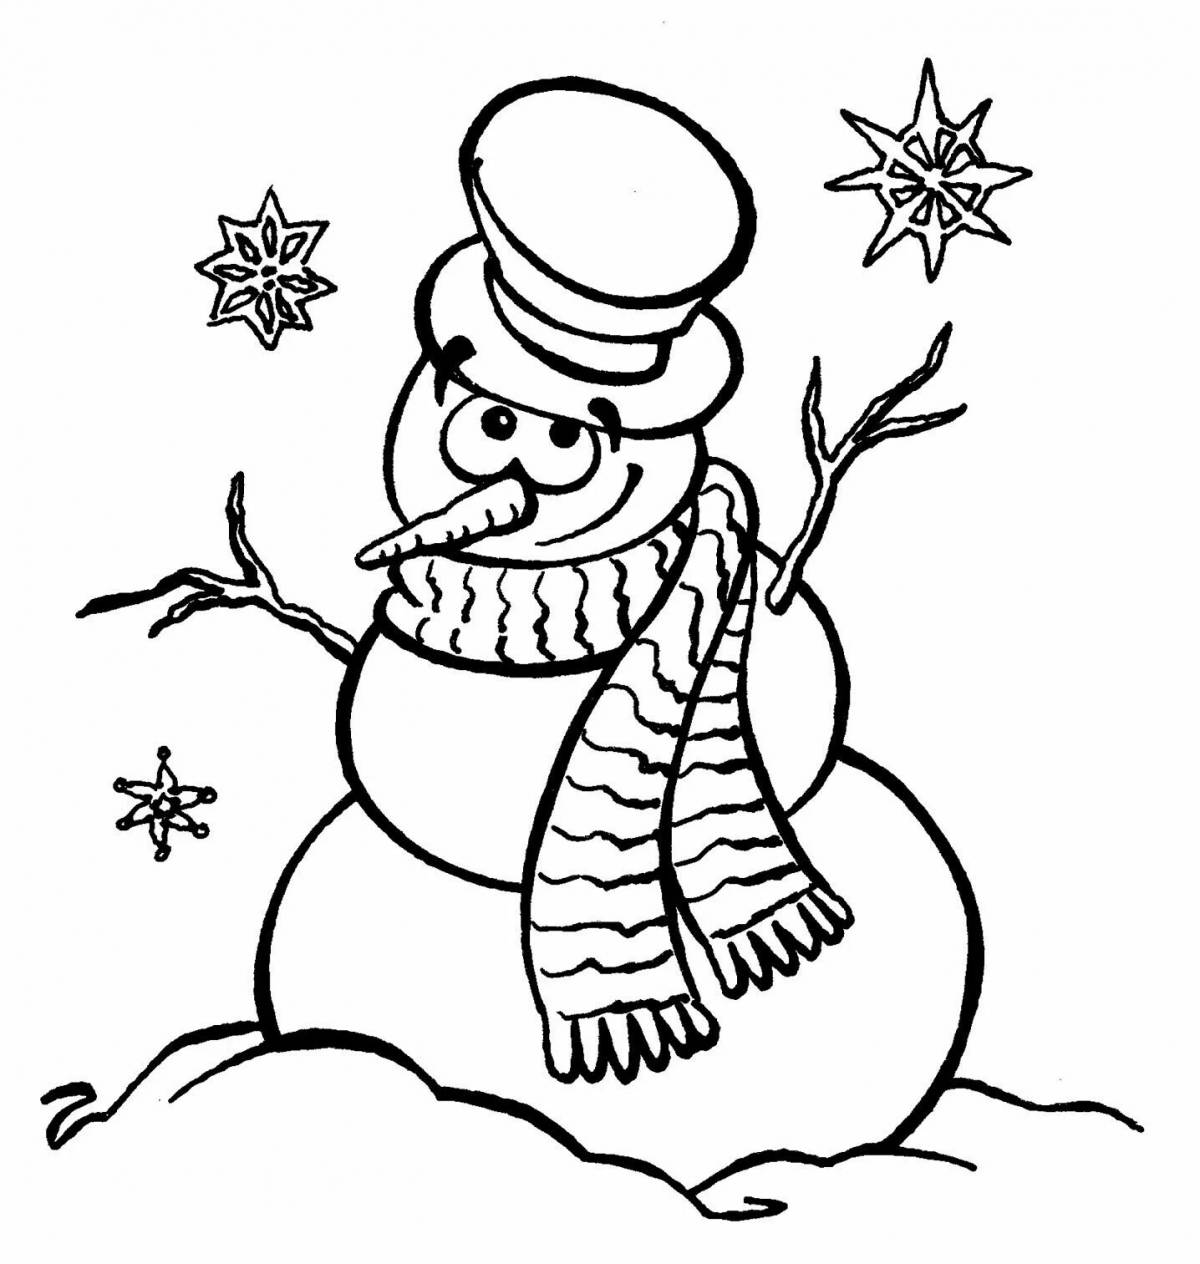 Exotic funny snowman coloring book for kids